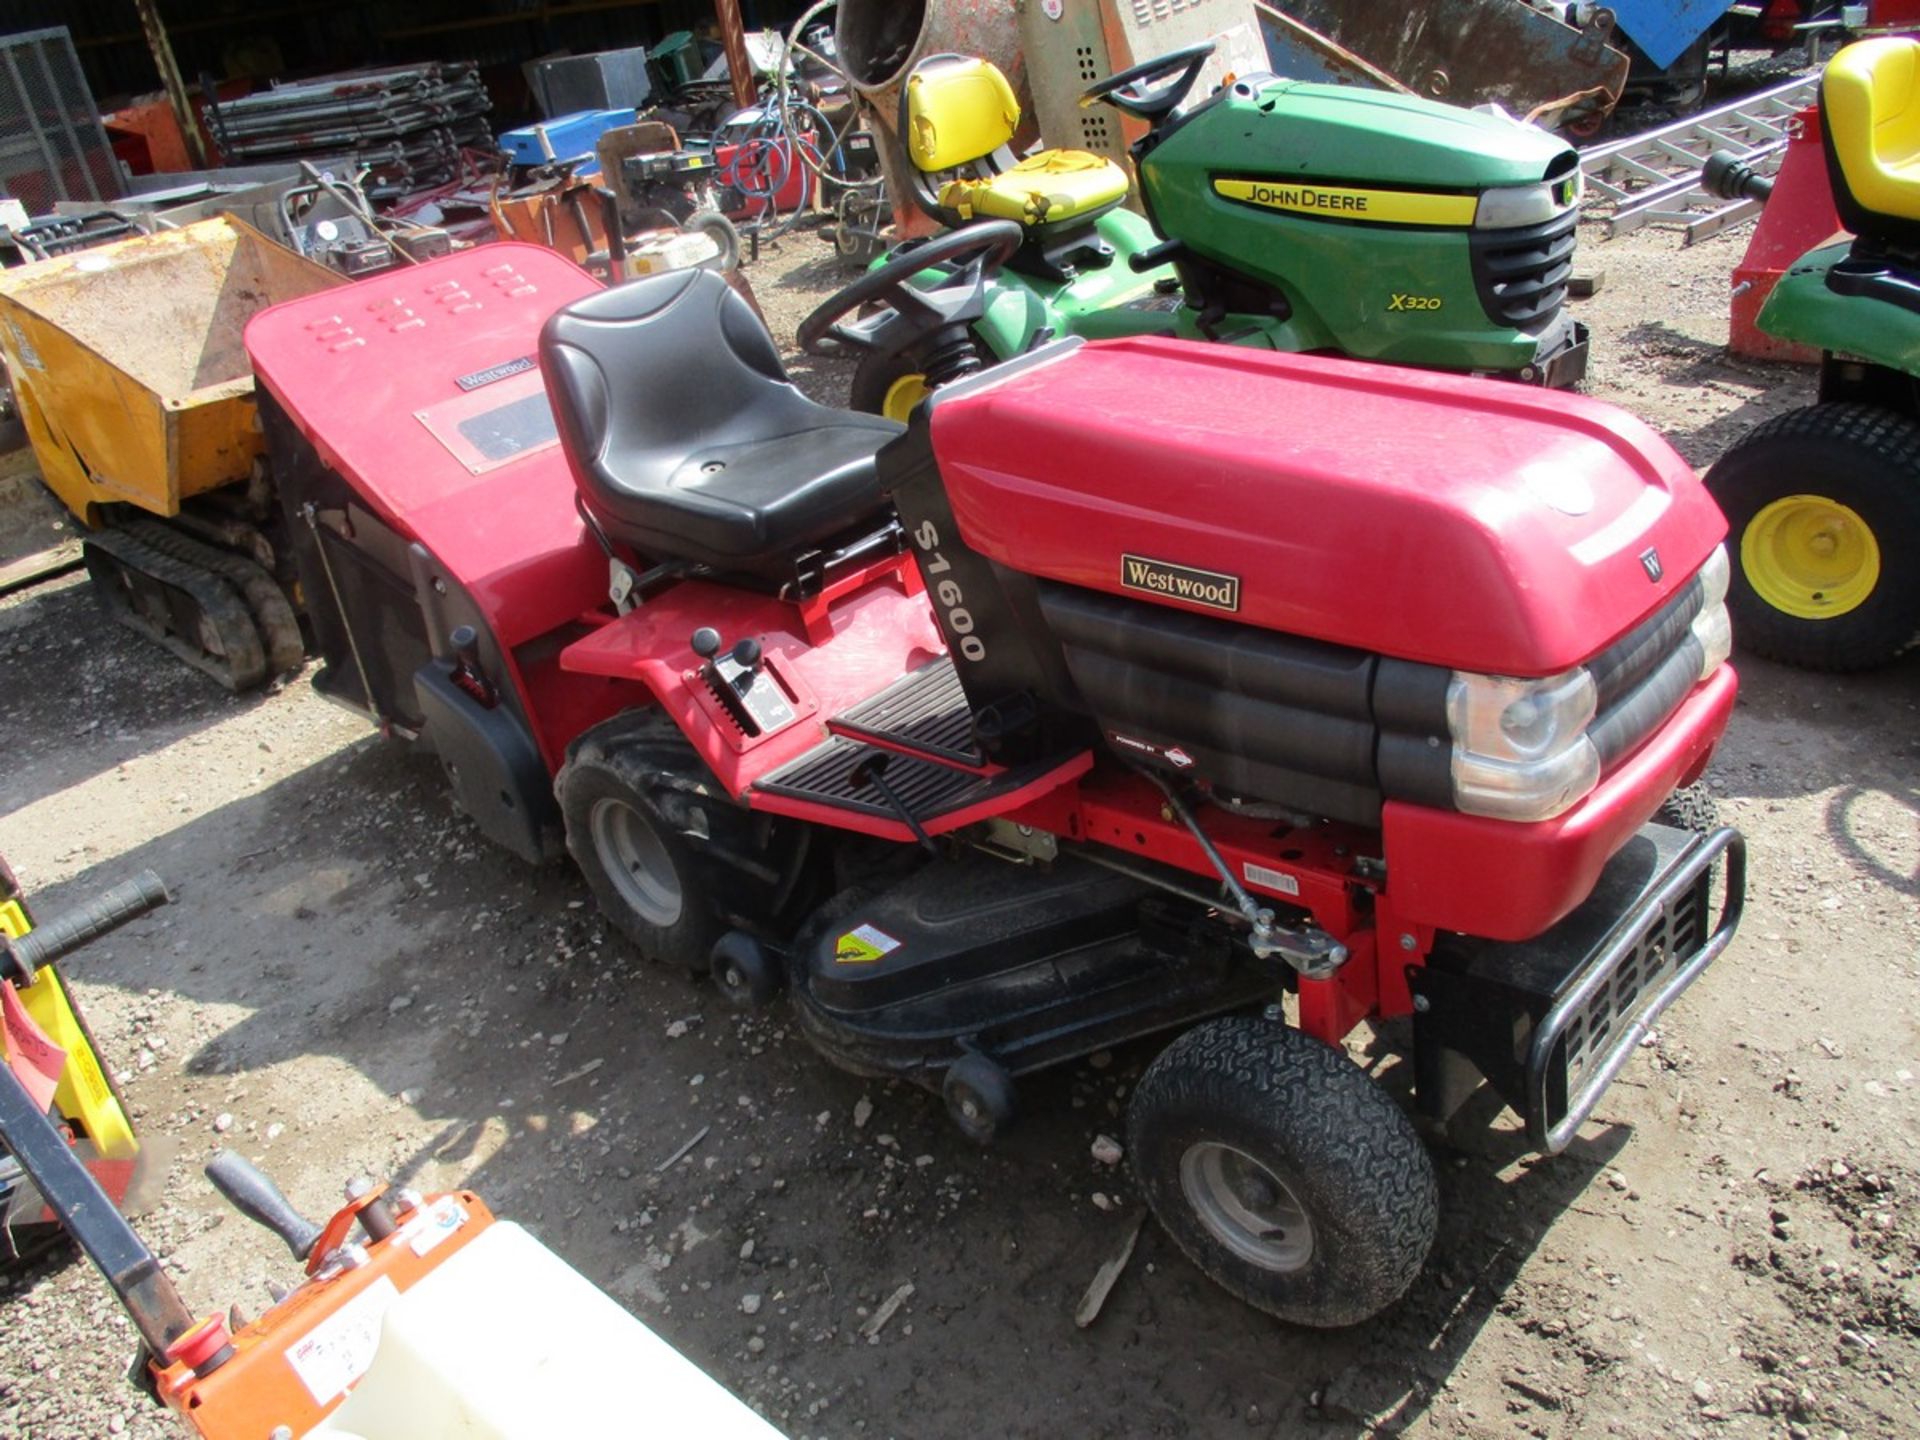 WESTWOOD S1600 RIDE ON MOWER C.W COLLECTOR - Image 2 of 4